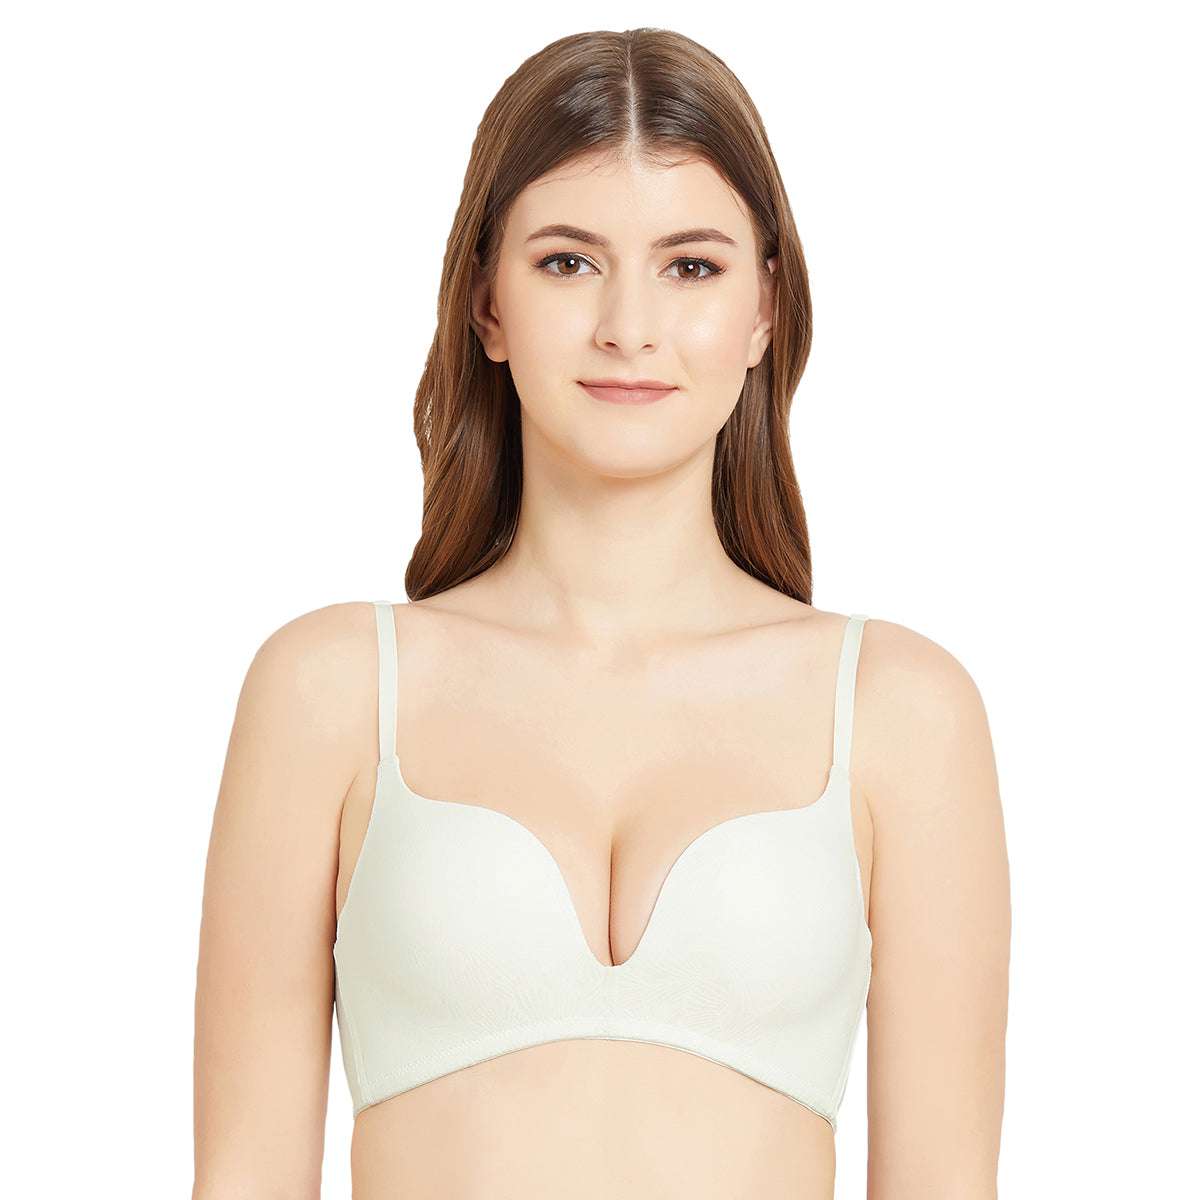 Ecozen Padded Non-wired 3/4th Cup Everyday Wear Push-up Bra - Light Yellow